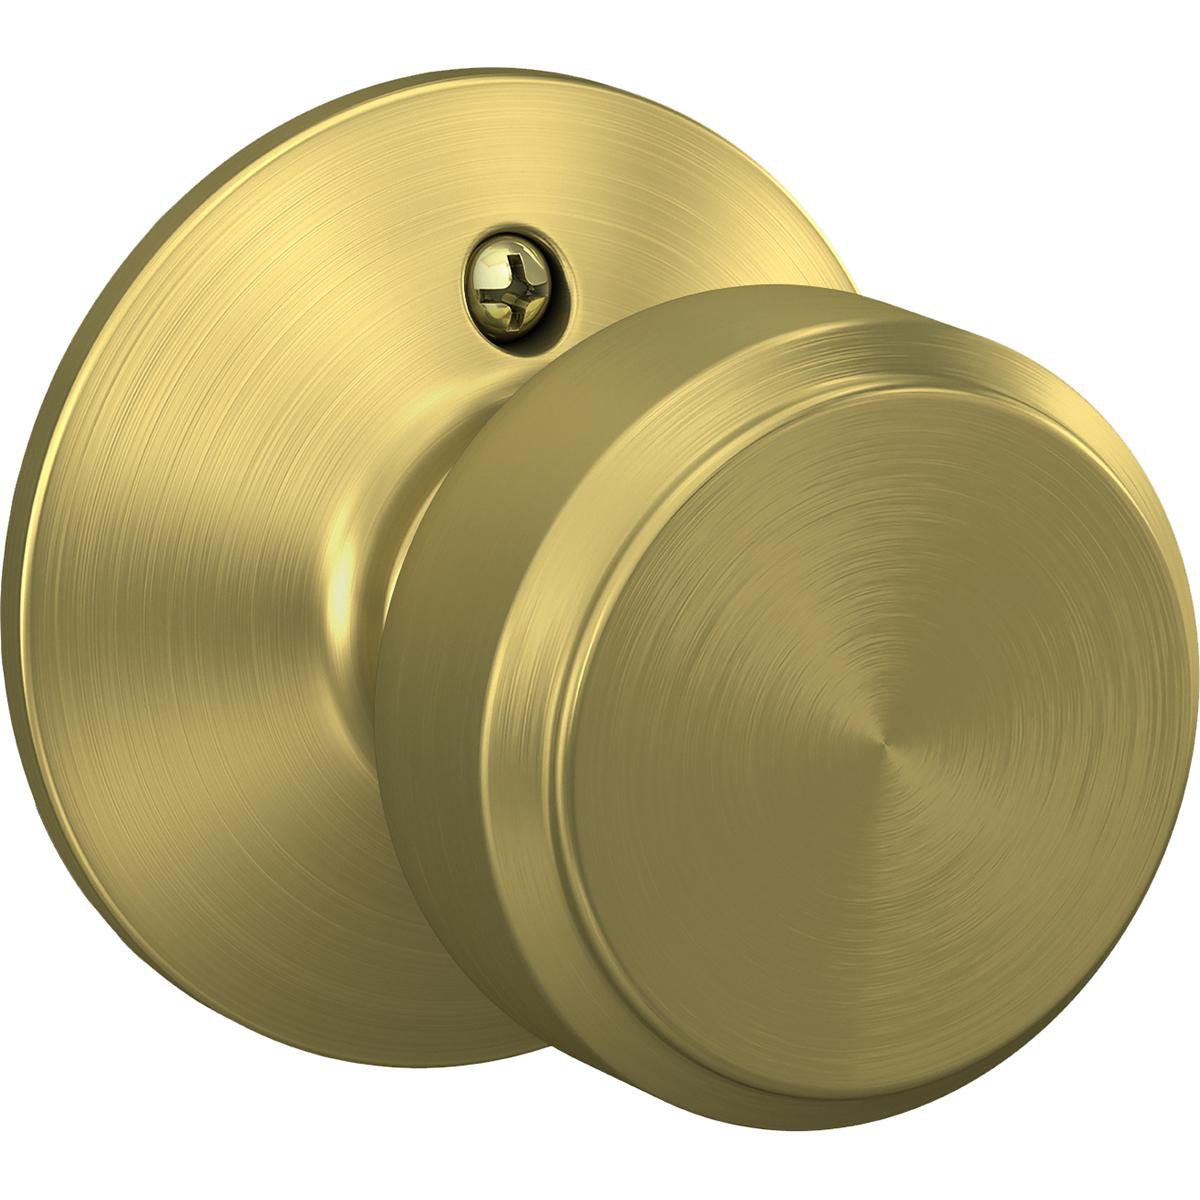 Bowery Privacy Knob with Collins Trim